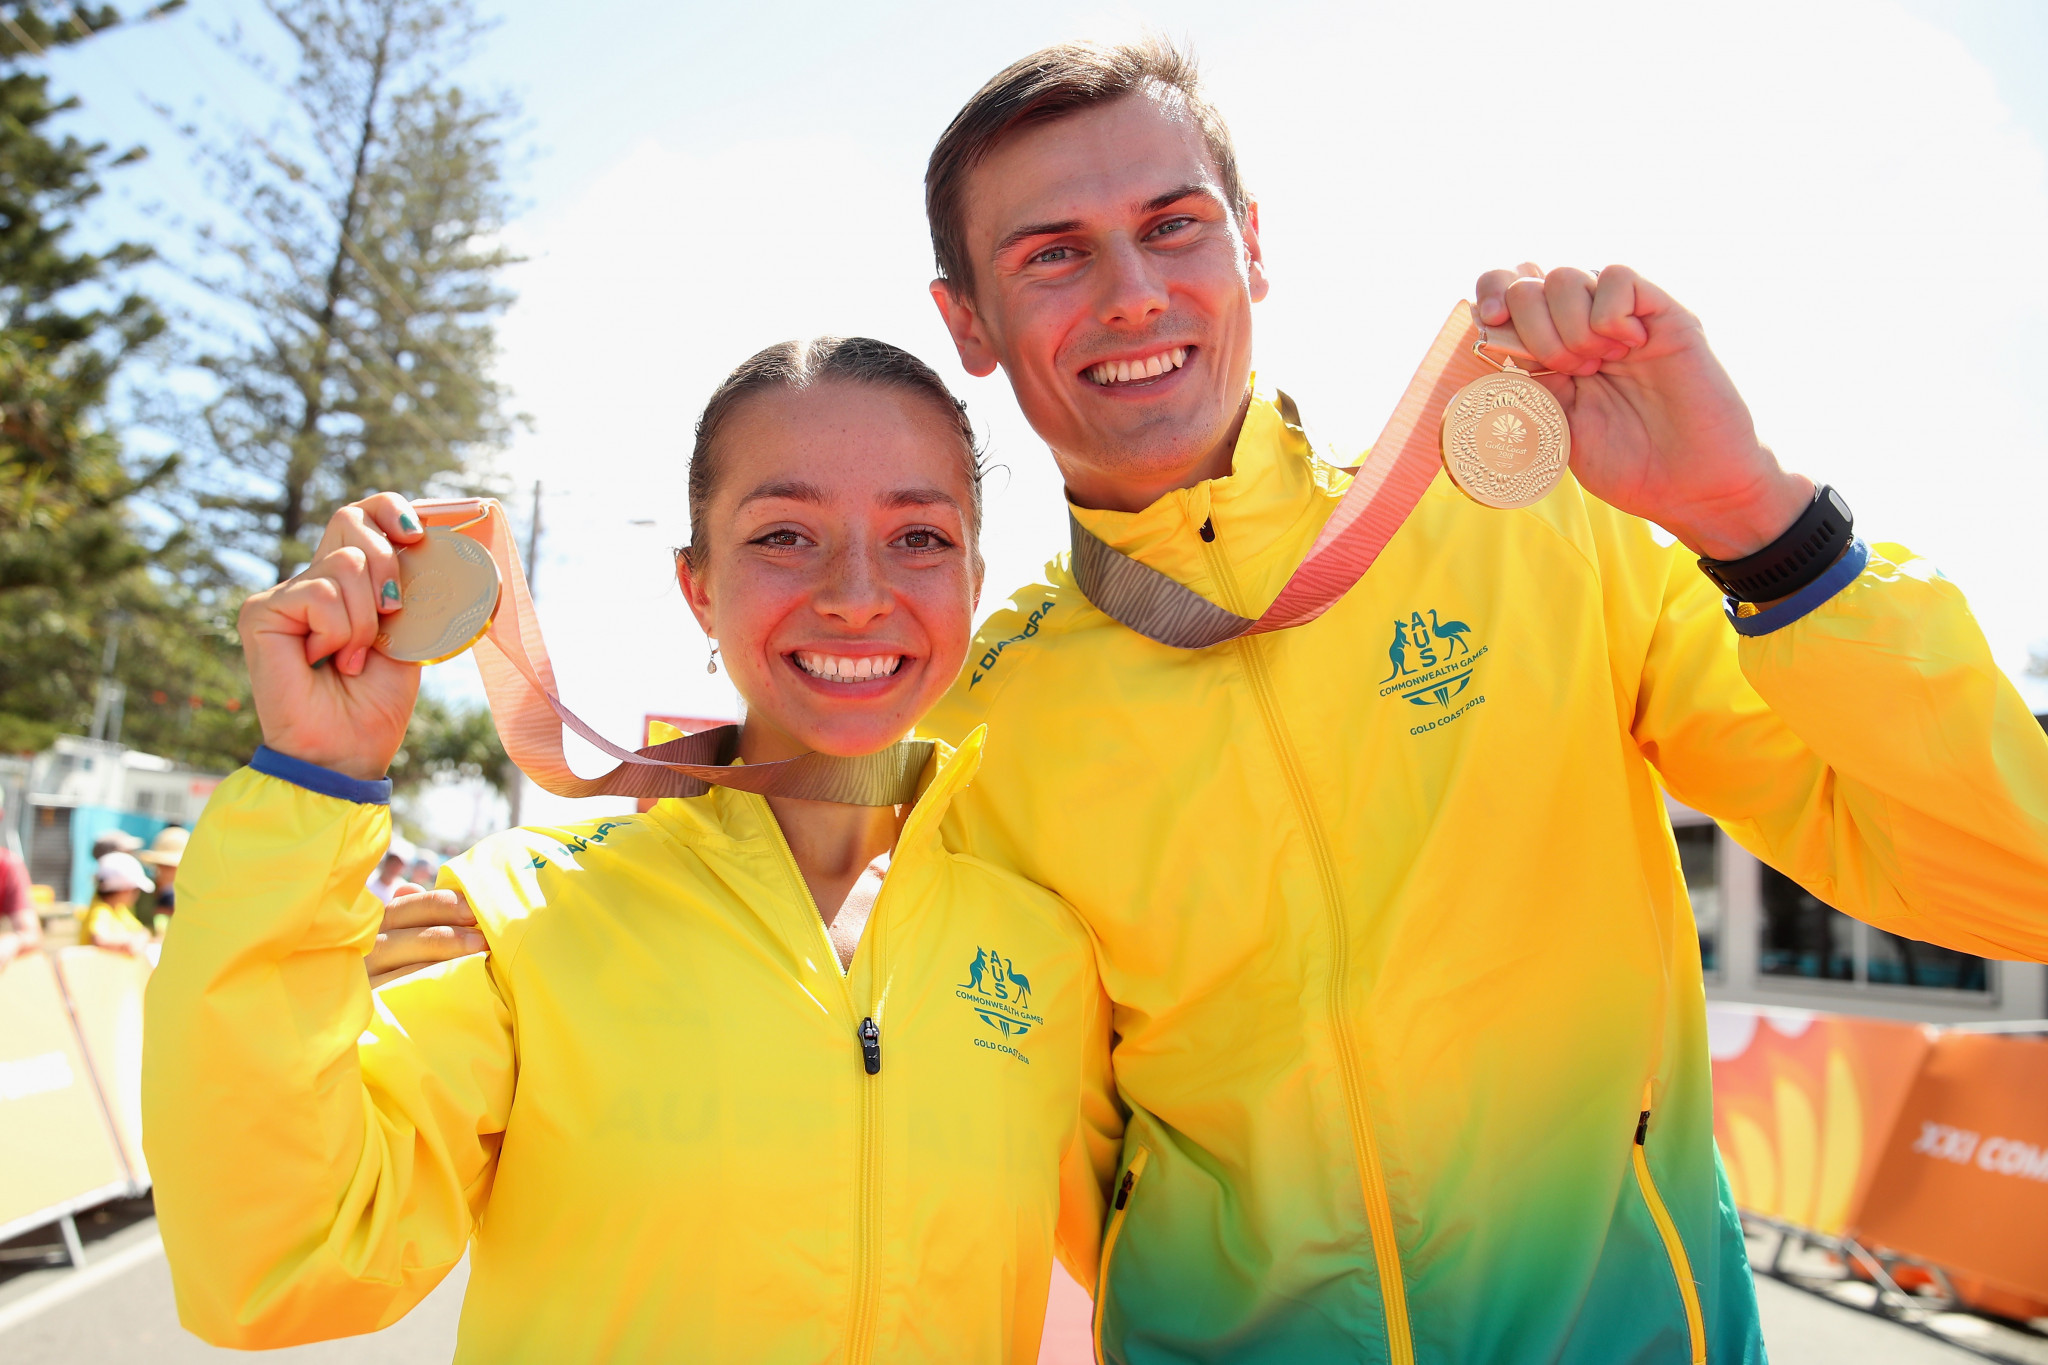 Australia's Dane Bird-Smith and Jemima Montag won the respective men's and women's 20 kilometres race walking events as athletics action begun on day four of the Gold Goast 2018 Commonwealth Games ©Getty Images